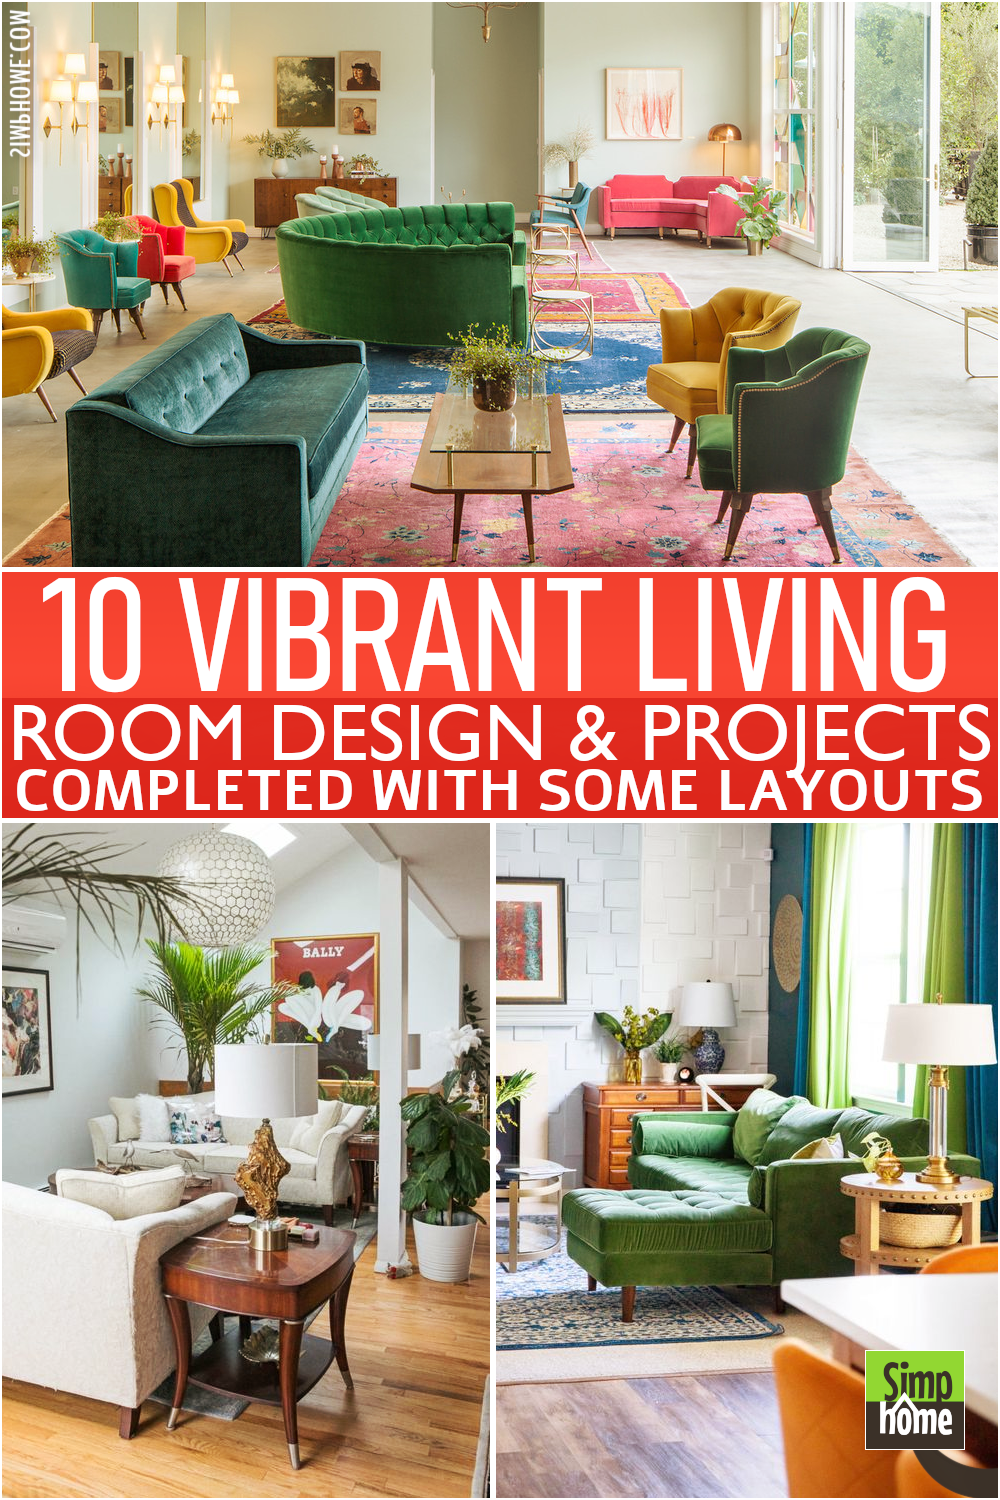 This image is about 10 Vibrant Living Rooms Poster